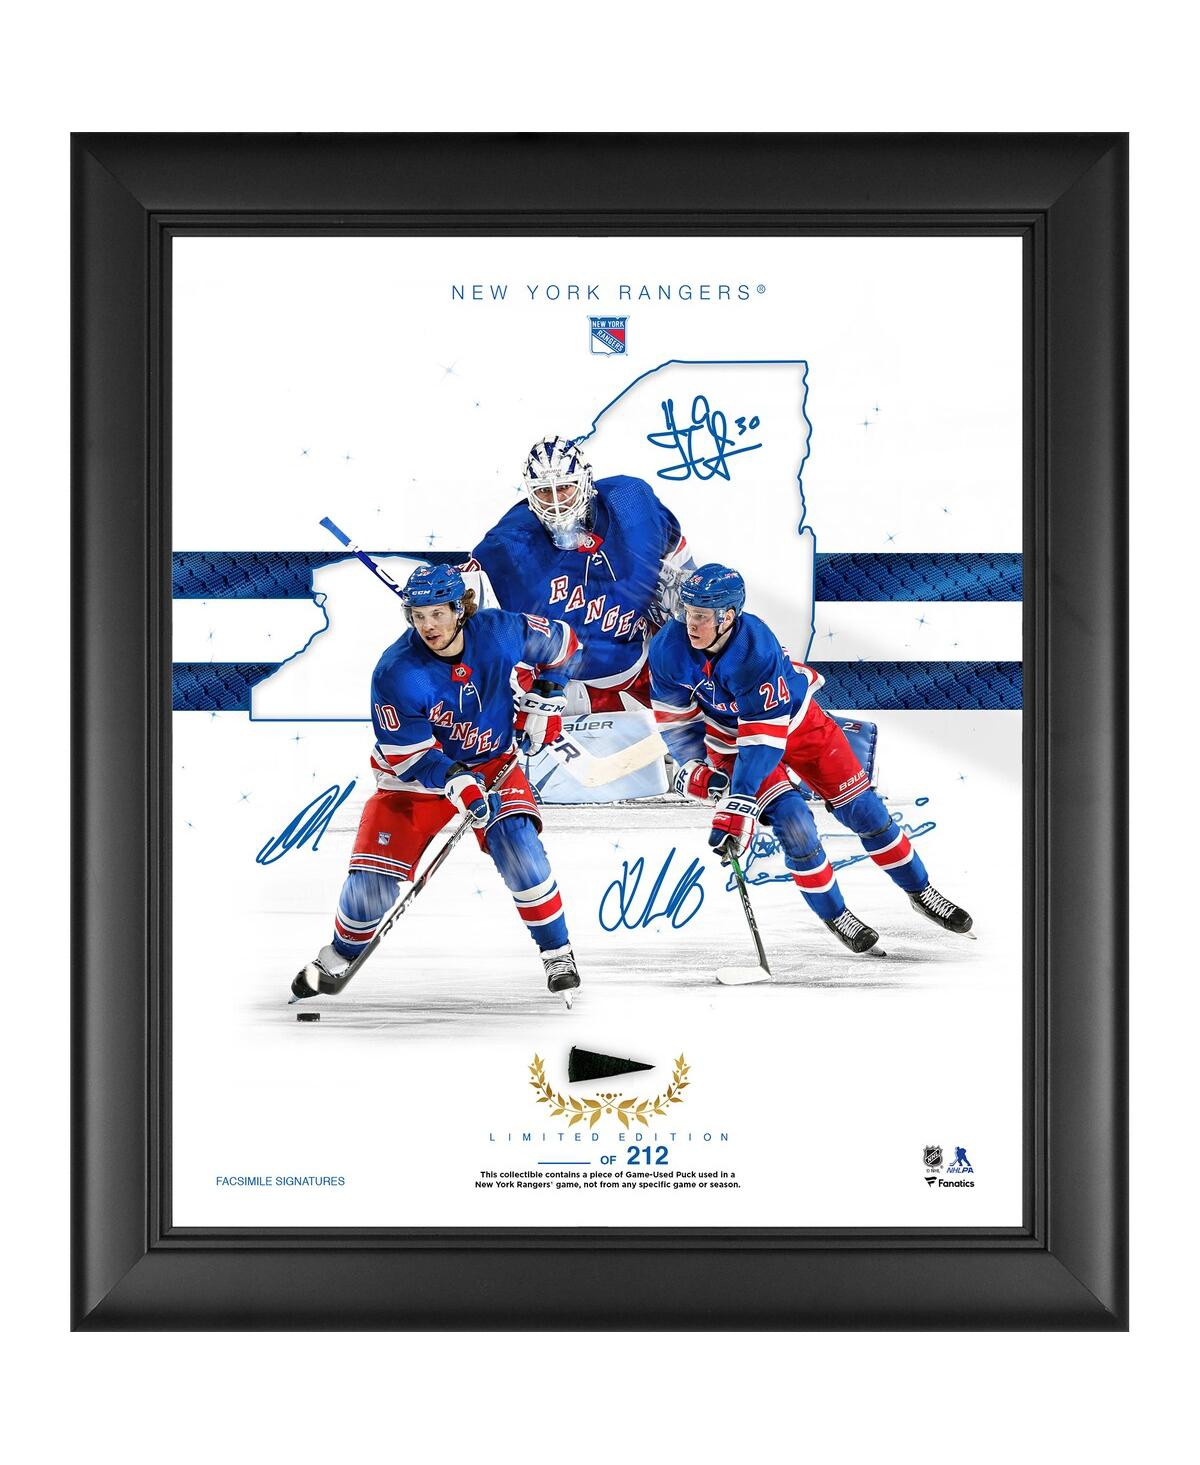 Fanatics Authentic New York Rangers Framed 15" X 17" Franchise Foundations Collage With A Piece Of Game Used Puck In Multi